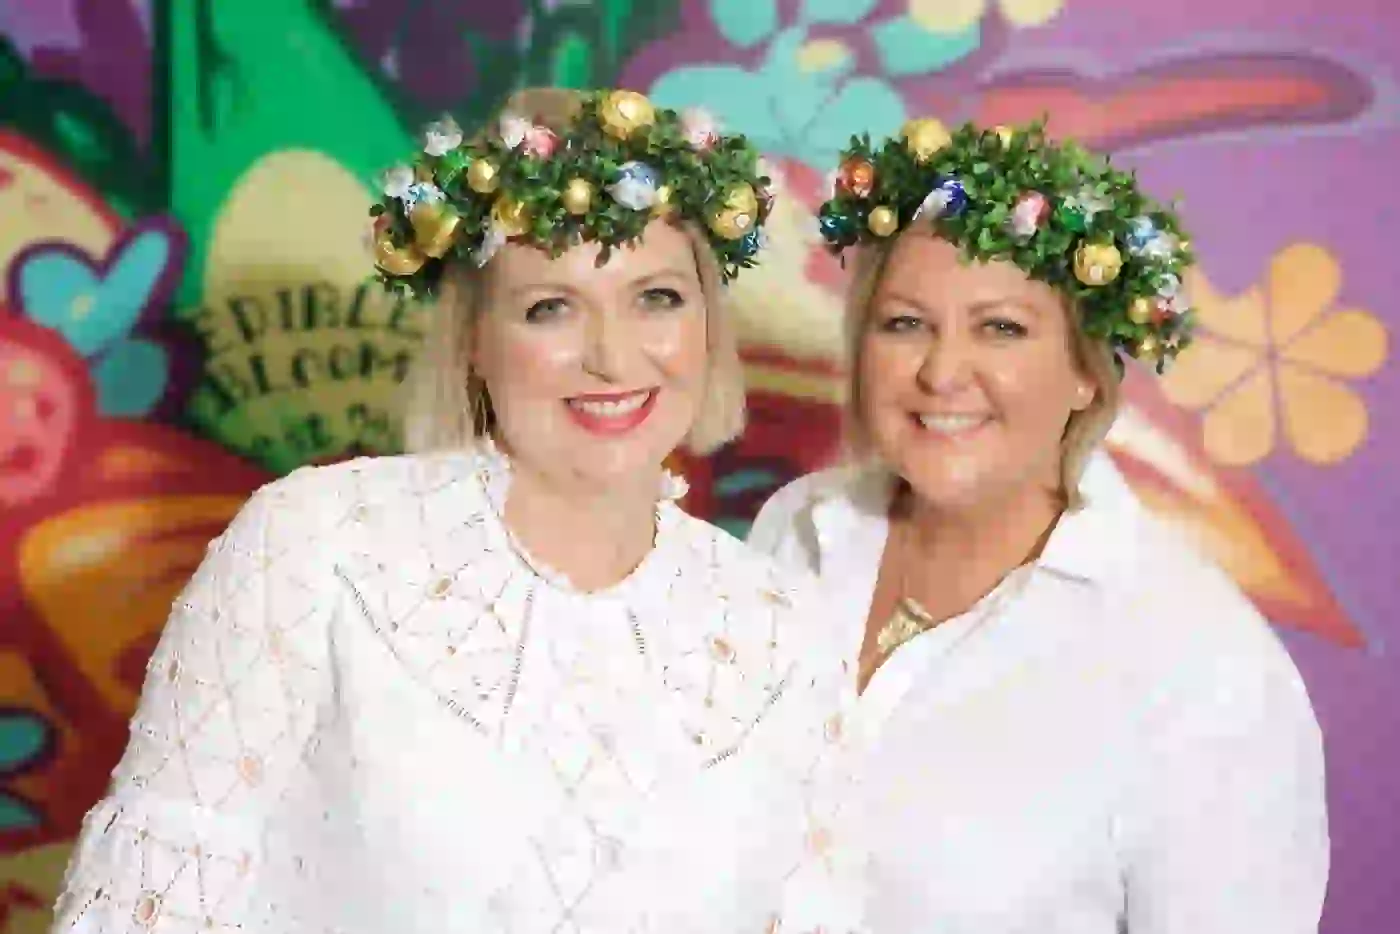 Blossoming business success: The Edible Blooms story - Kelly-and-Abbey-flower-pair